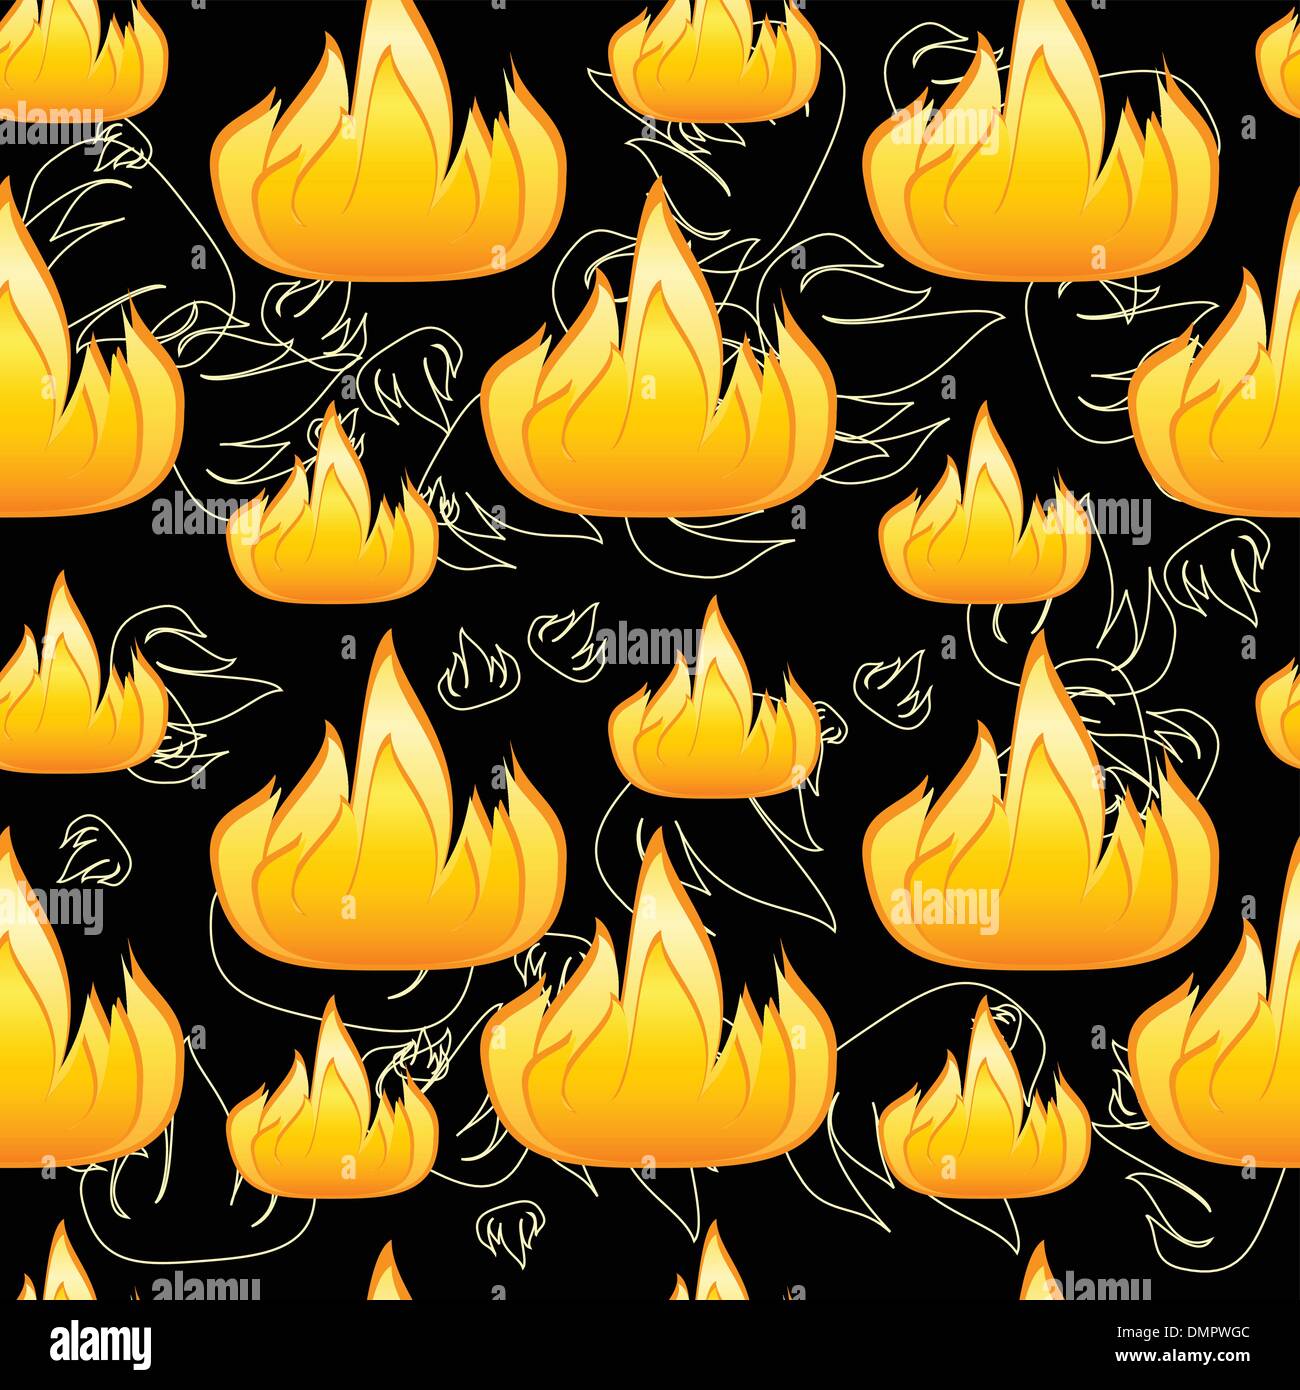 Seamless background. Fire Stock Vector